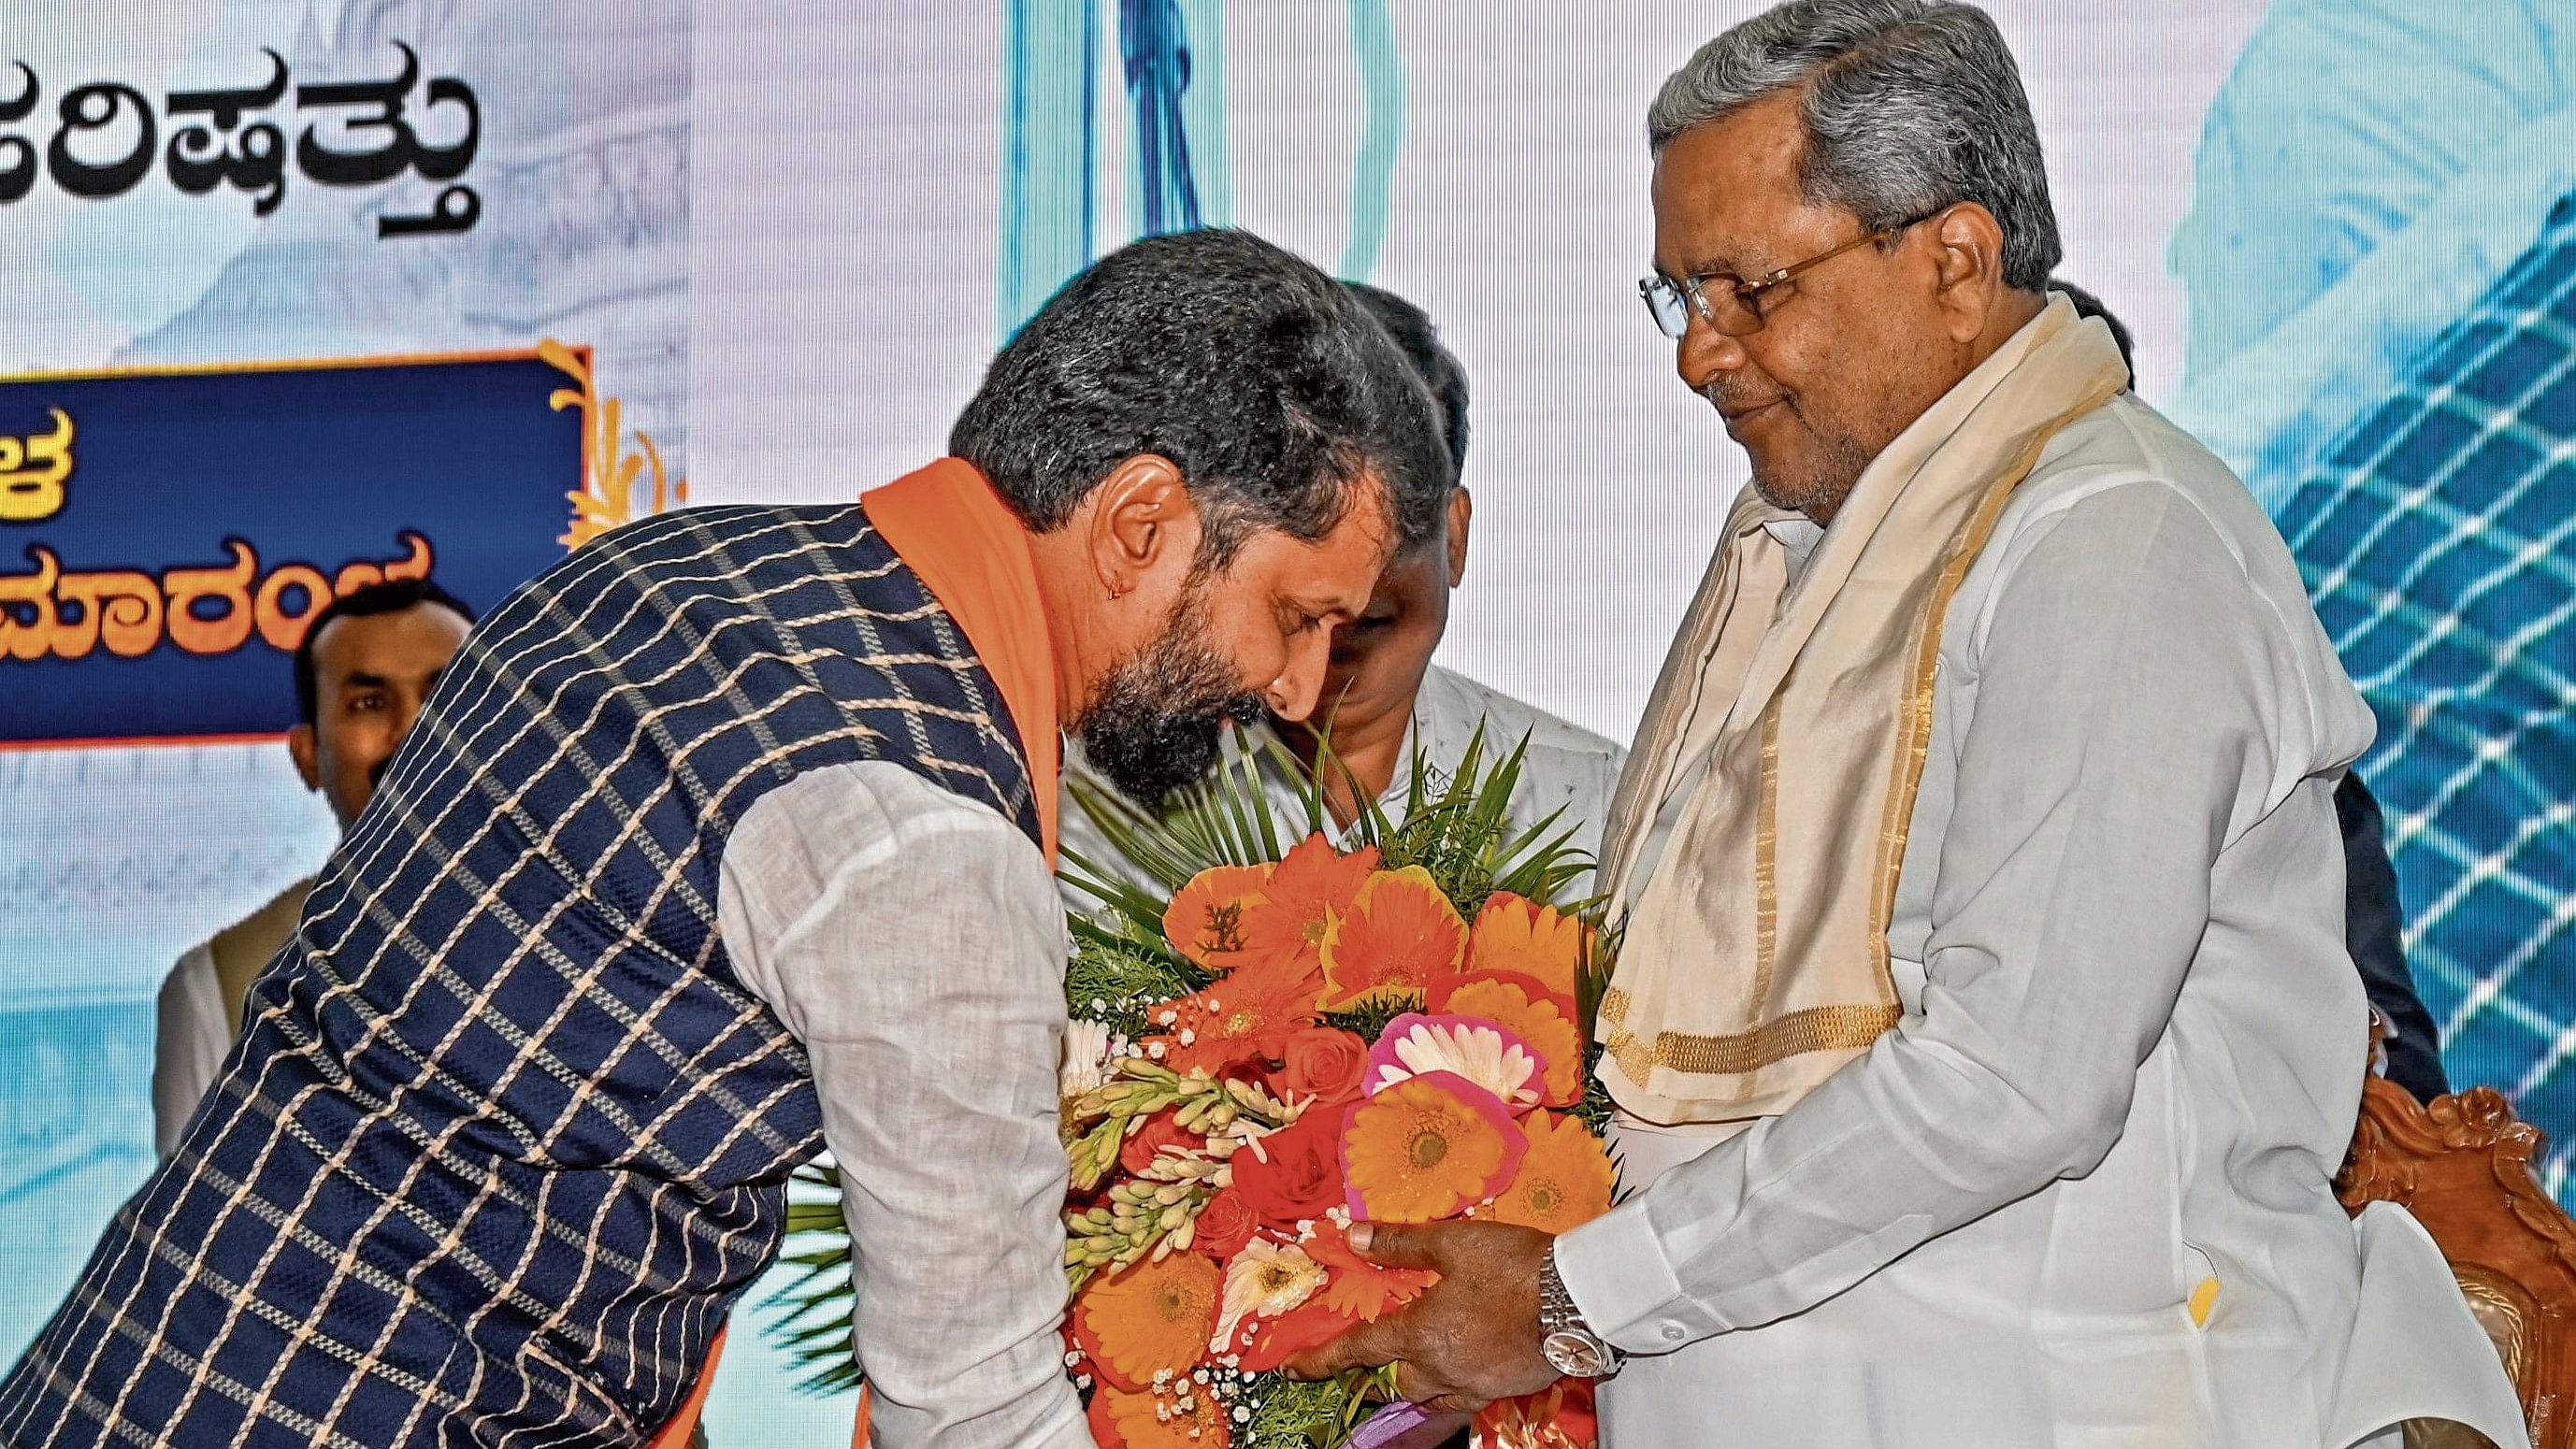 <div class="paragraphs"><p>C T Ravi Newly elected Legislative Council member greets Siddaramaiah Chief Minister after taking oath at a swearing ceremony organise by Legislative Council in Banquette hall, Vidhana Soudha, Bengaluru on Monday, 24th June 2024. </p></div>